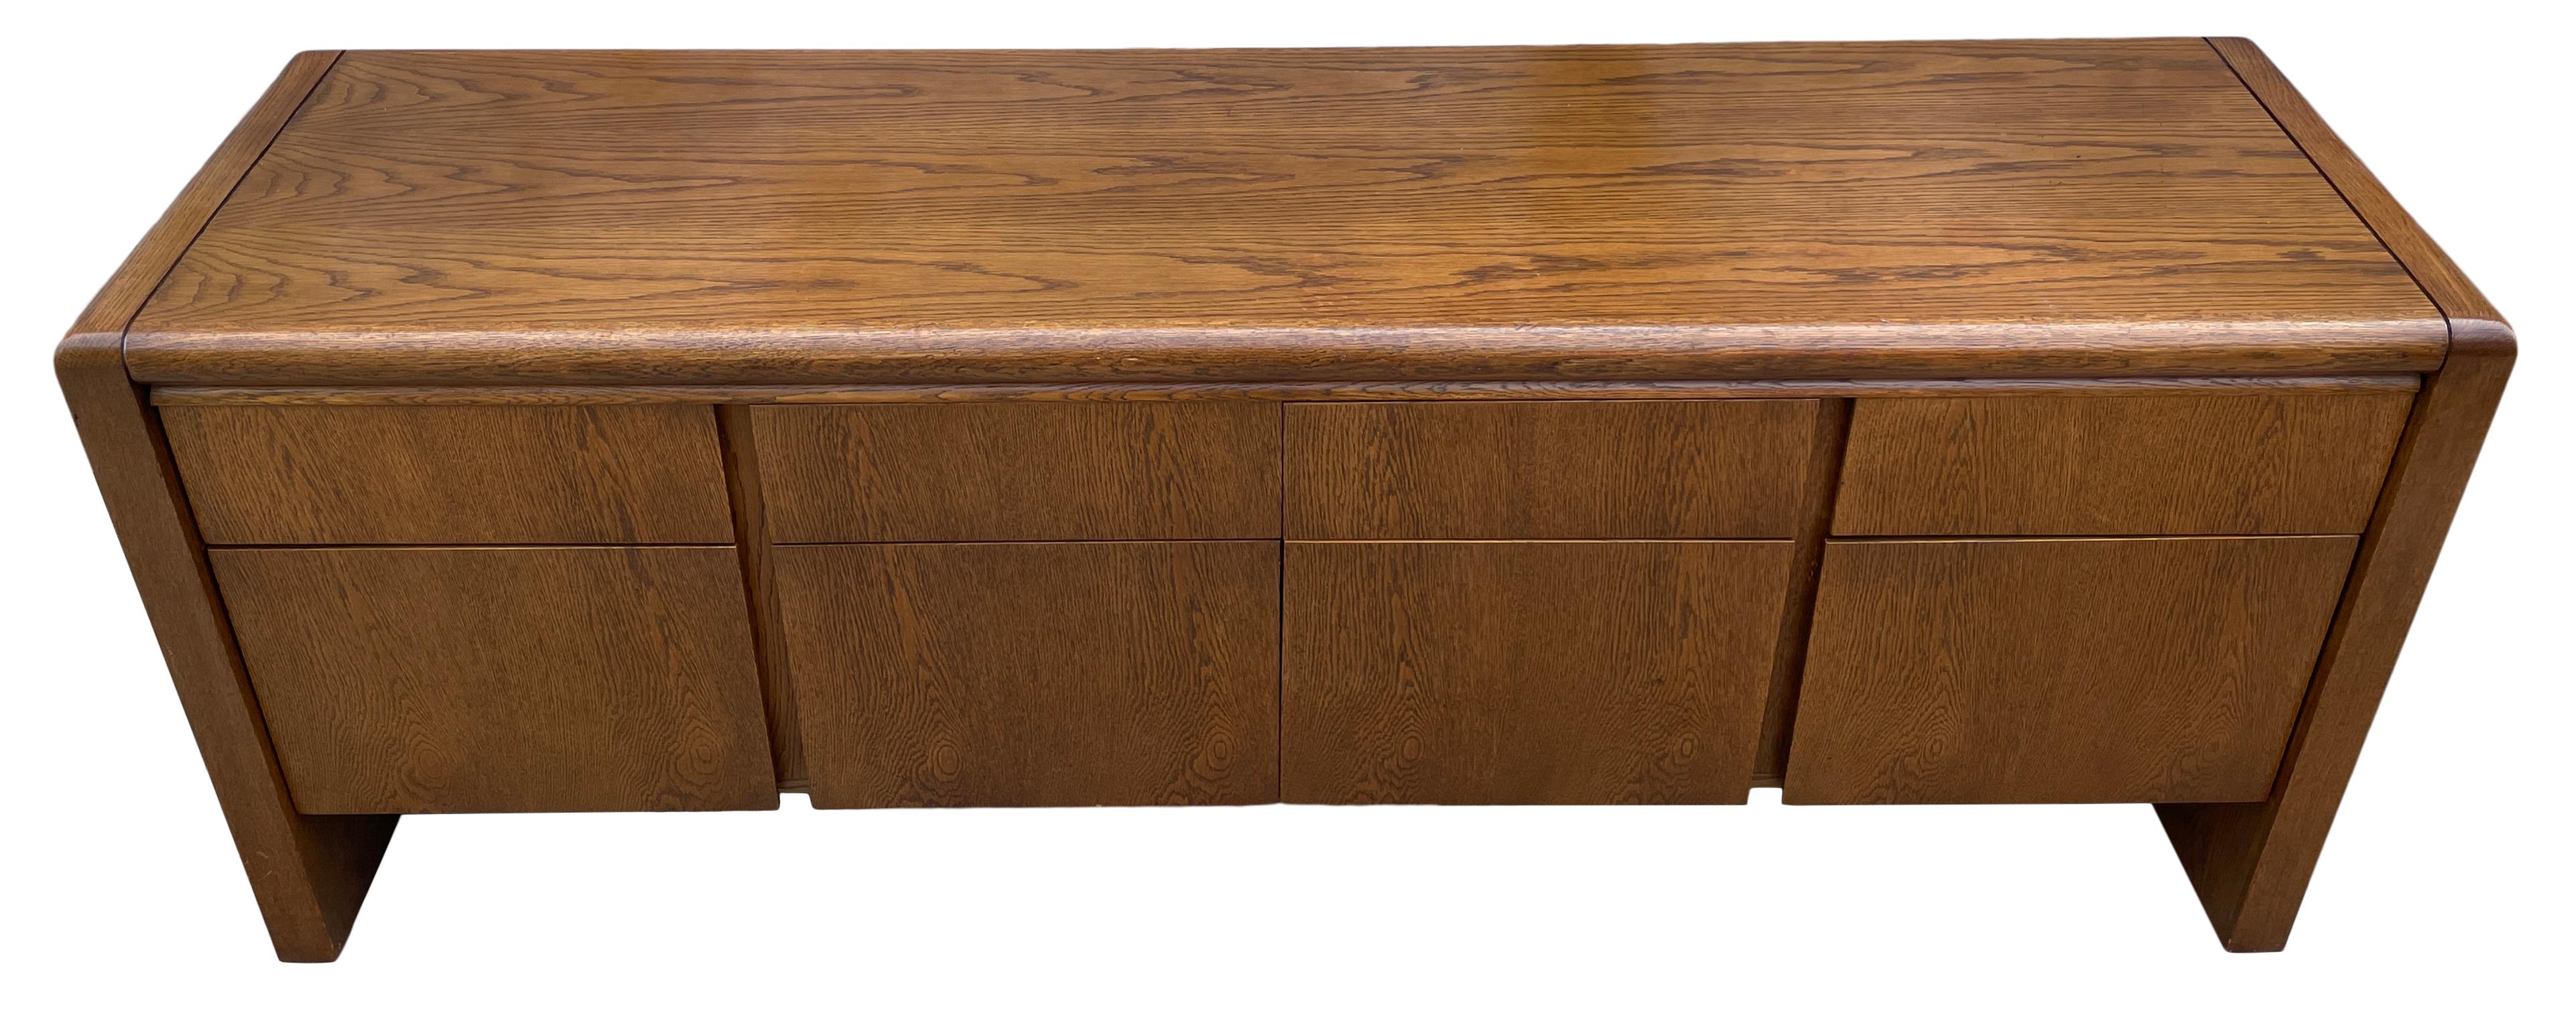 Mid-Century Modern 1980s American custom waterfall Oak credenza cabinet 8 drawer style of Florence Knoll or Milo Baughman. Beautiful design very solid credenza with 4 upper drawer and 4 lower deeper file drawers. All drawers have metal smooth